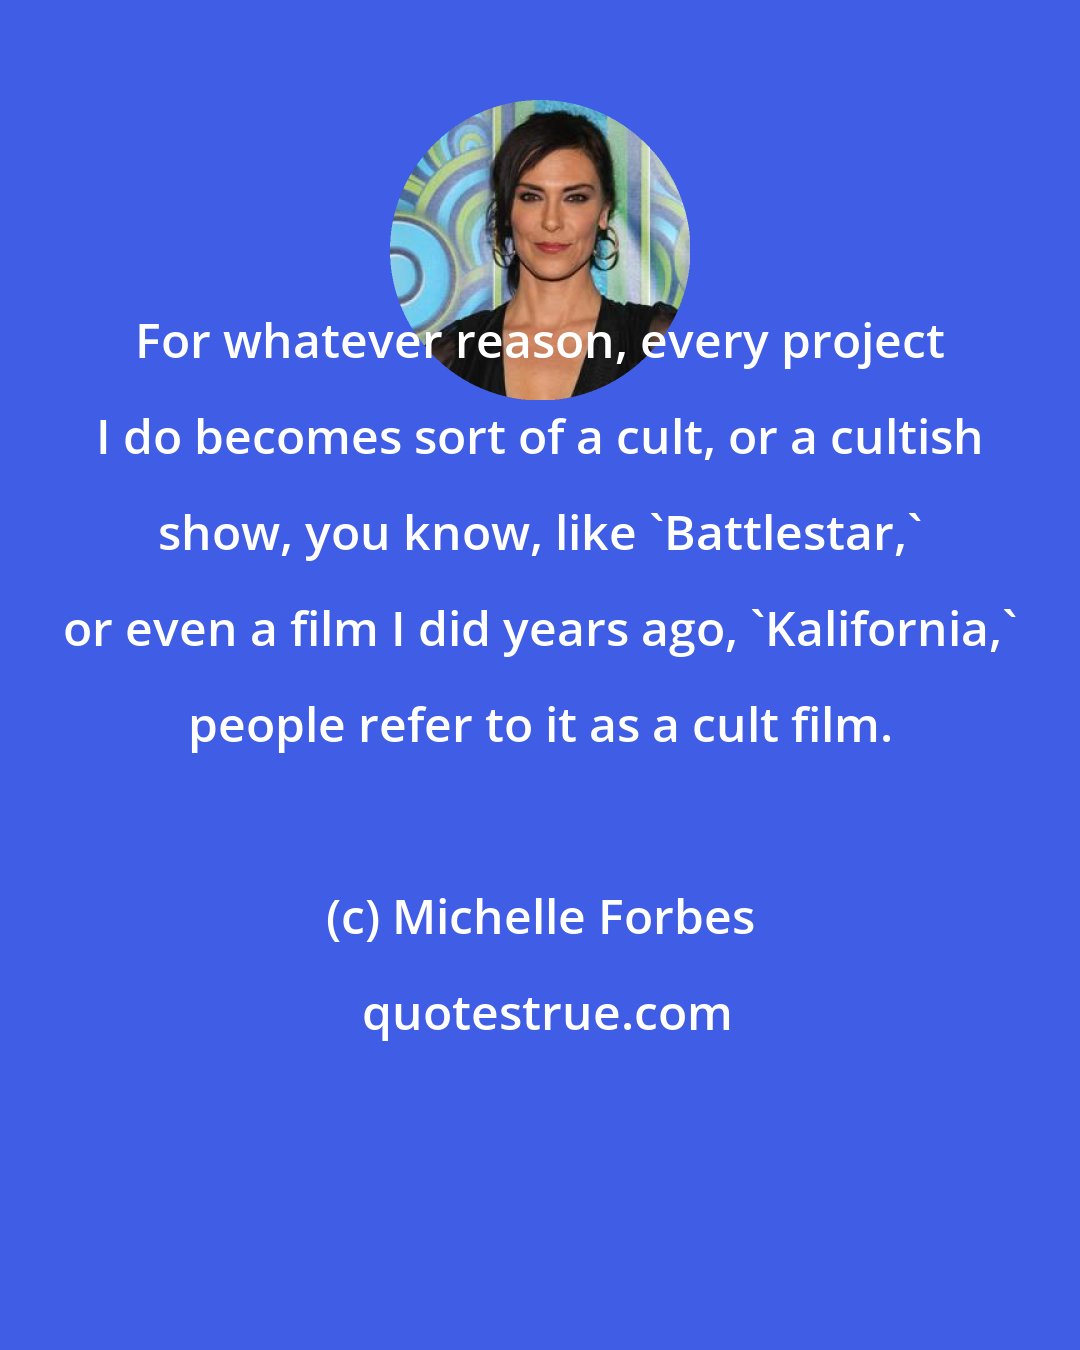 Michelle Forbes: For whatever reason, every project I do becomes sort of a cult, or a cultish show, you know, like 'Battlestar,' or even a film I did years ago, 'Kalifornia,' people refer to it as a cult film.